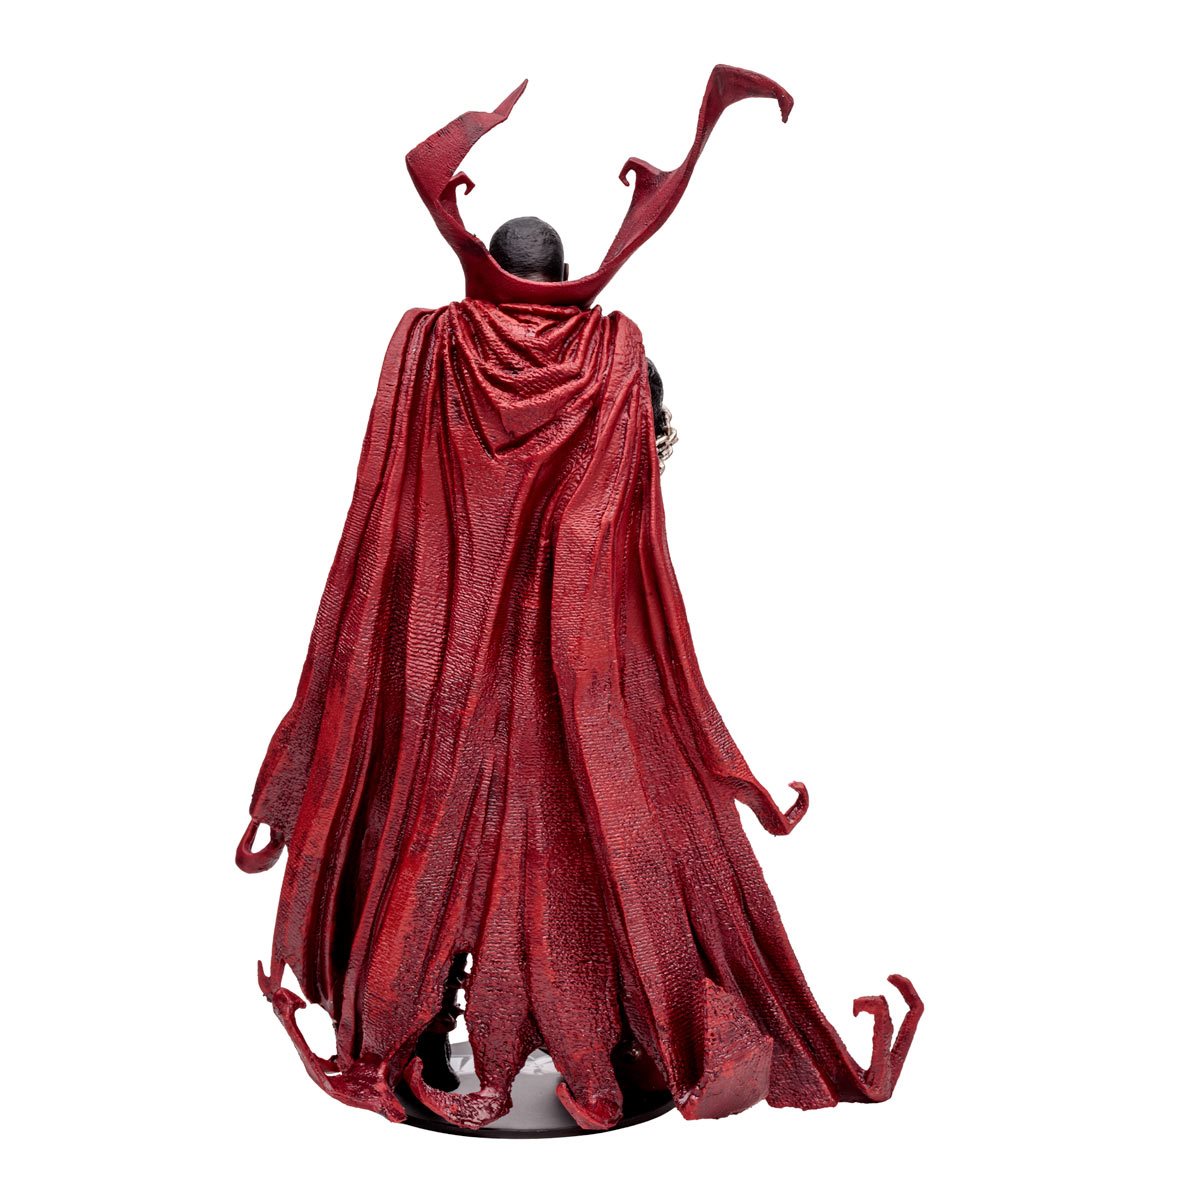 (PREVENTA) Spawn Wave 7 McFarlane Toys 30th Anniversary Spawn #311 7-Inch Scale Posed Figure